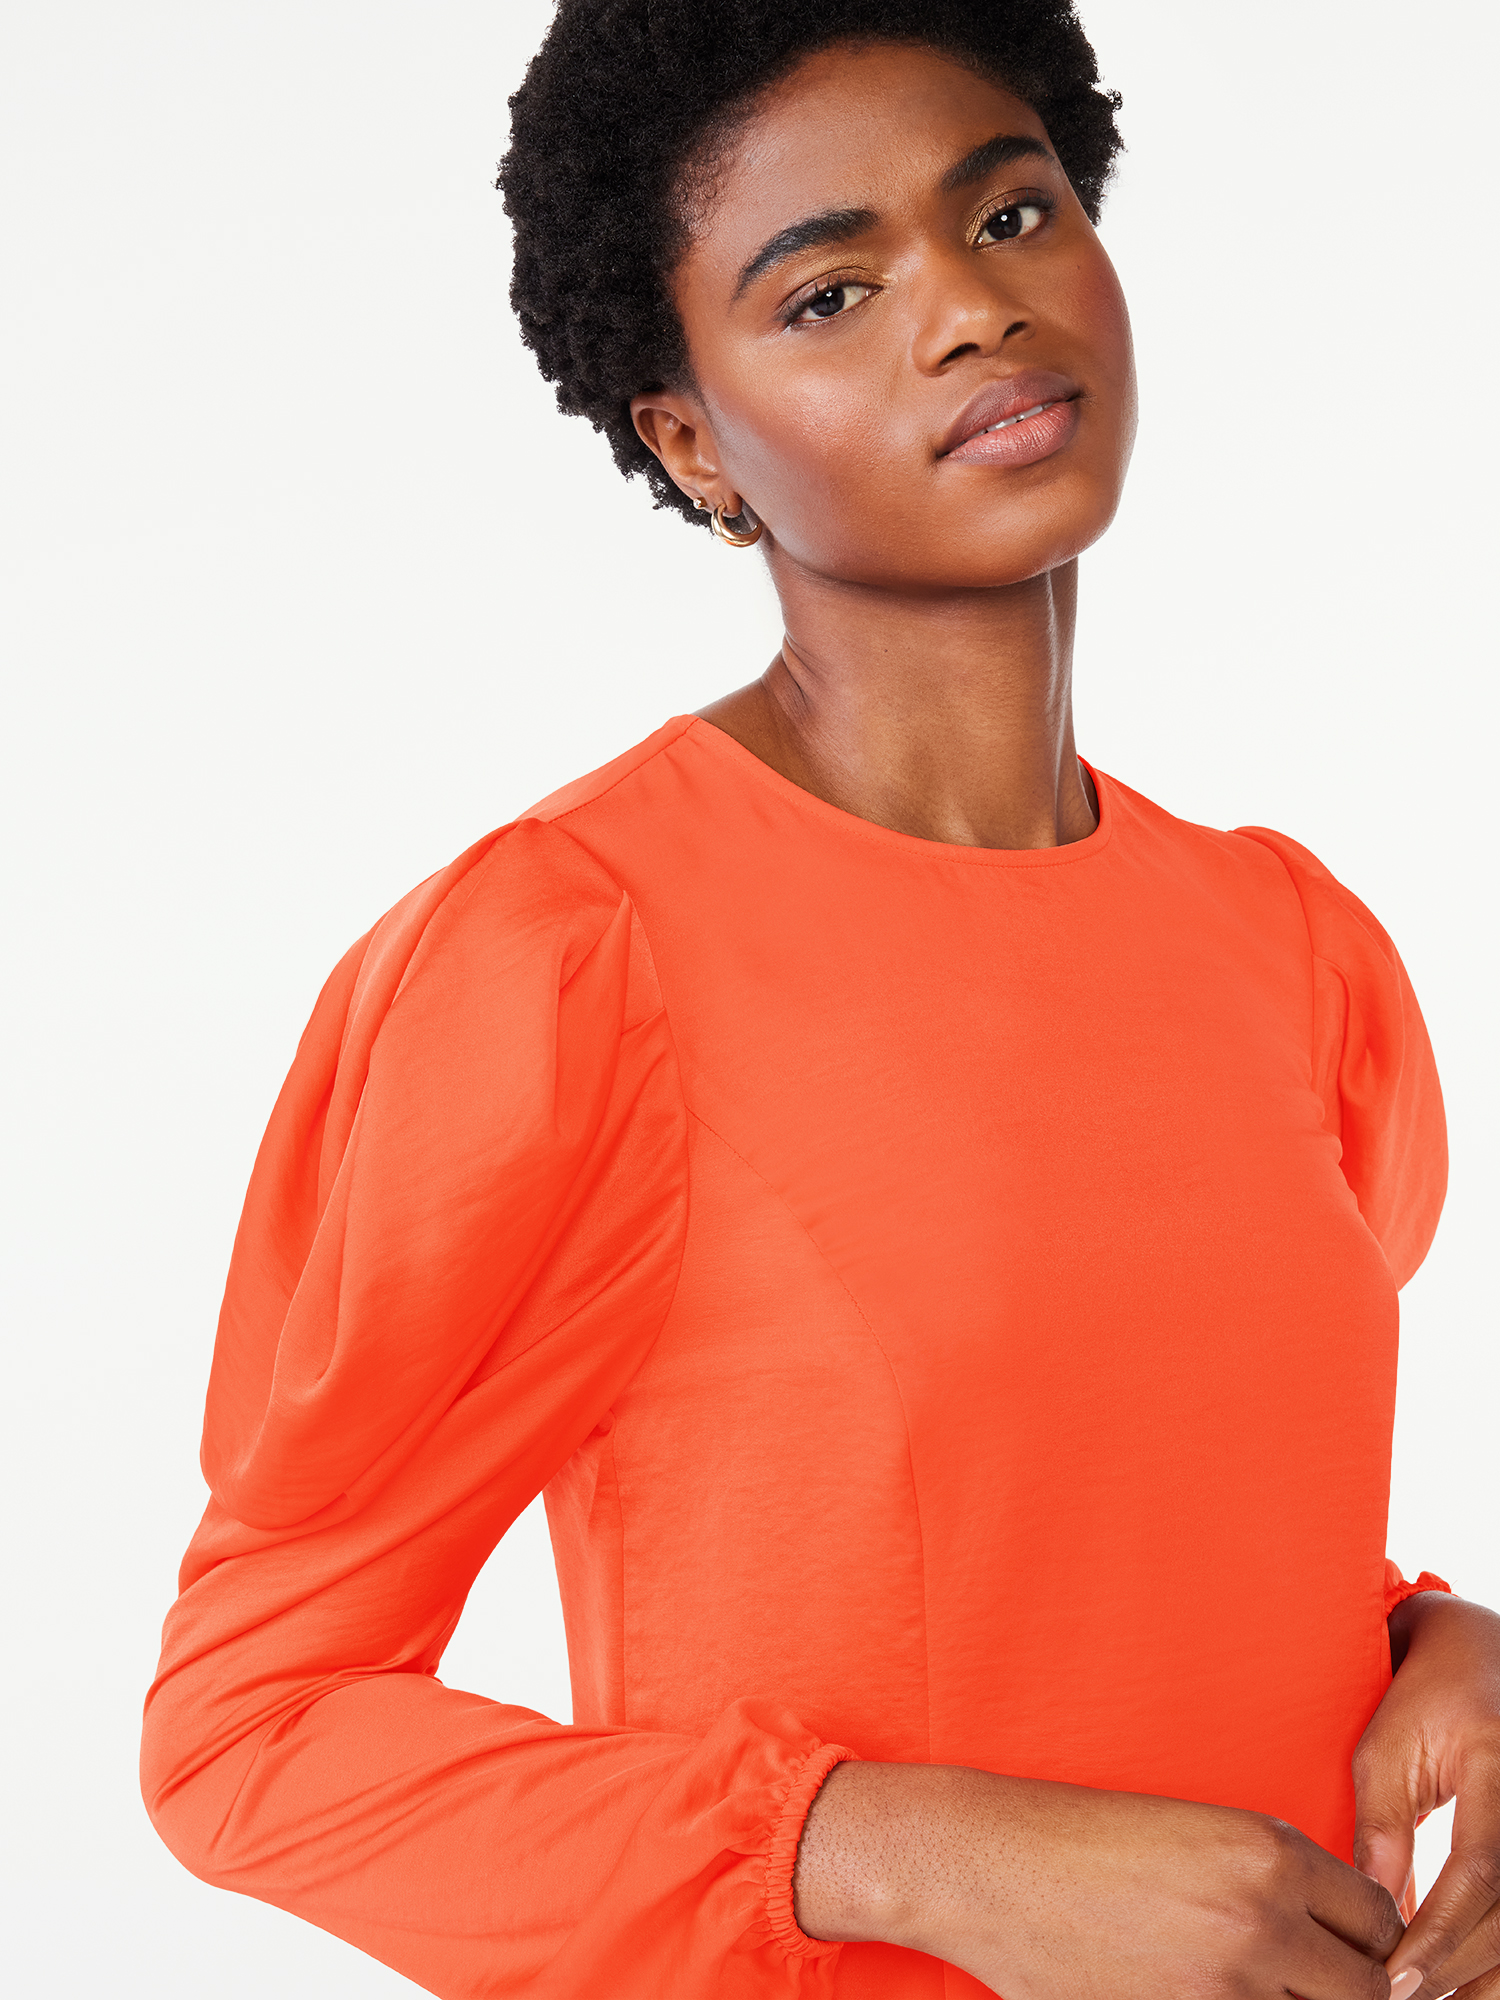 Scoop Women's Top with Blouson Sleeves, Sizes XS-XXL - image 4 of 5